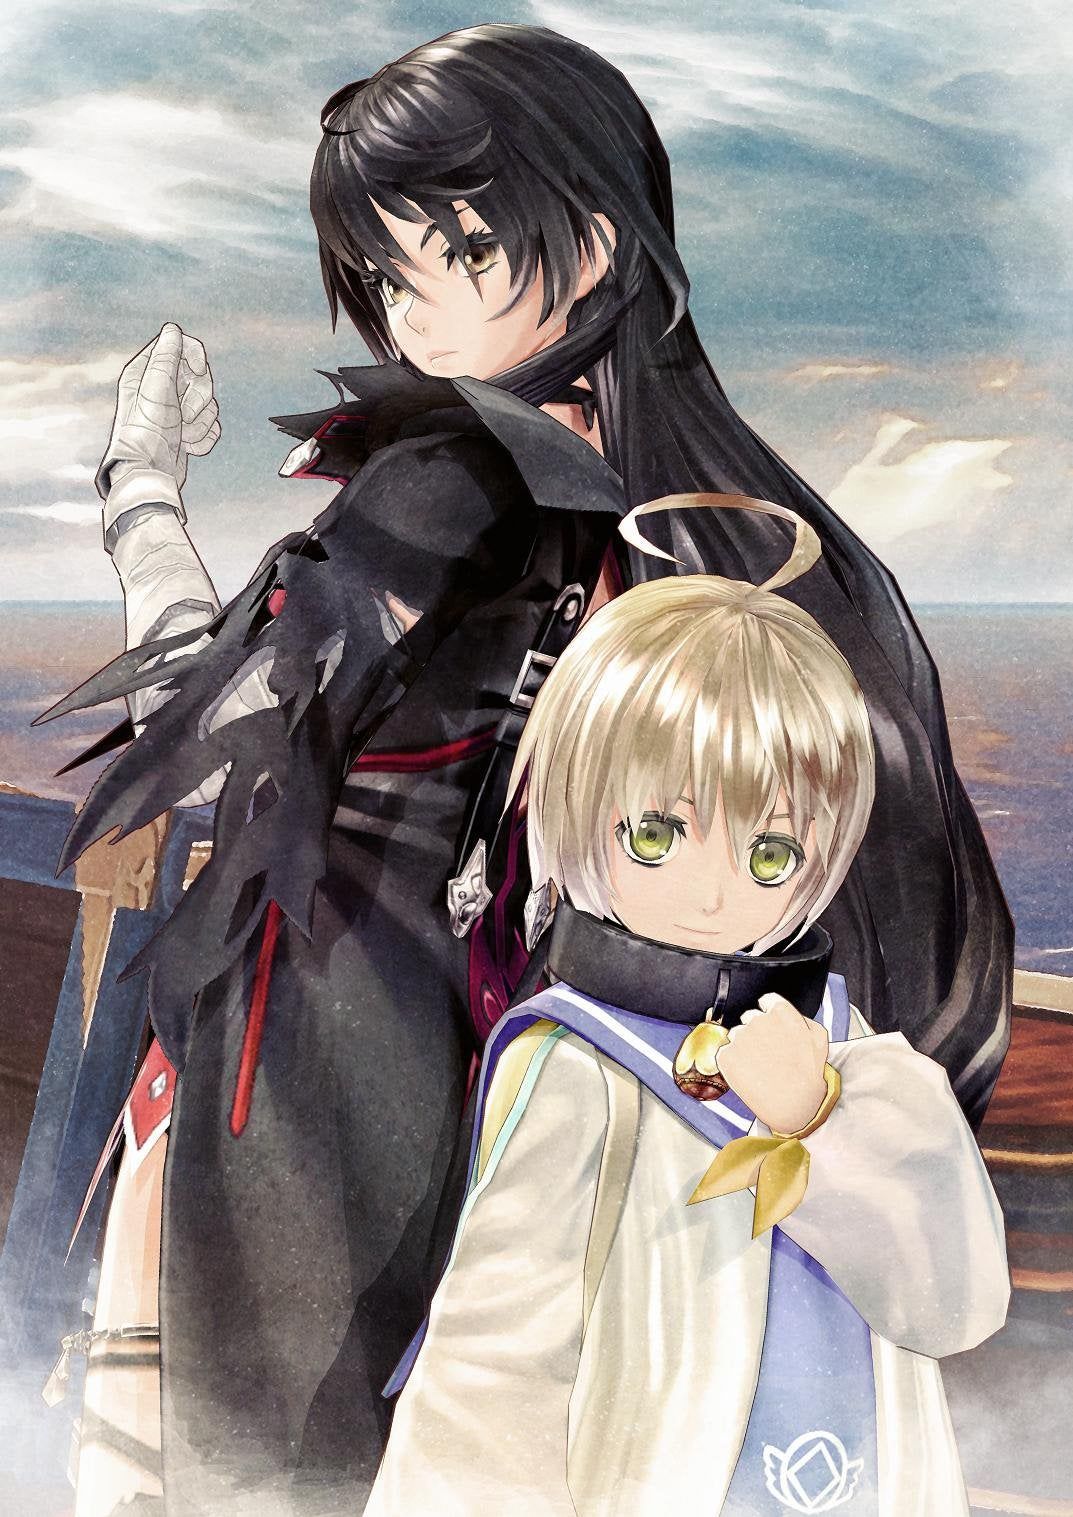 This makes a great phone wallpaper for anyone interested in Berseria hype